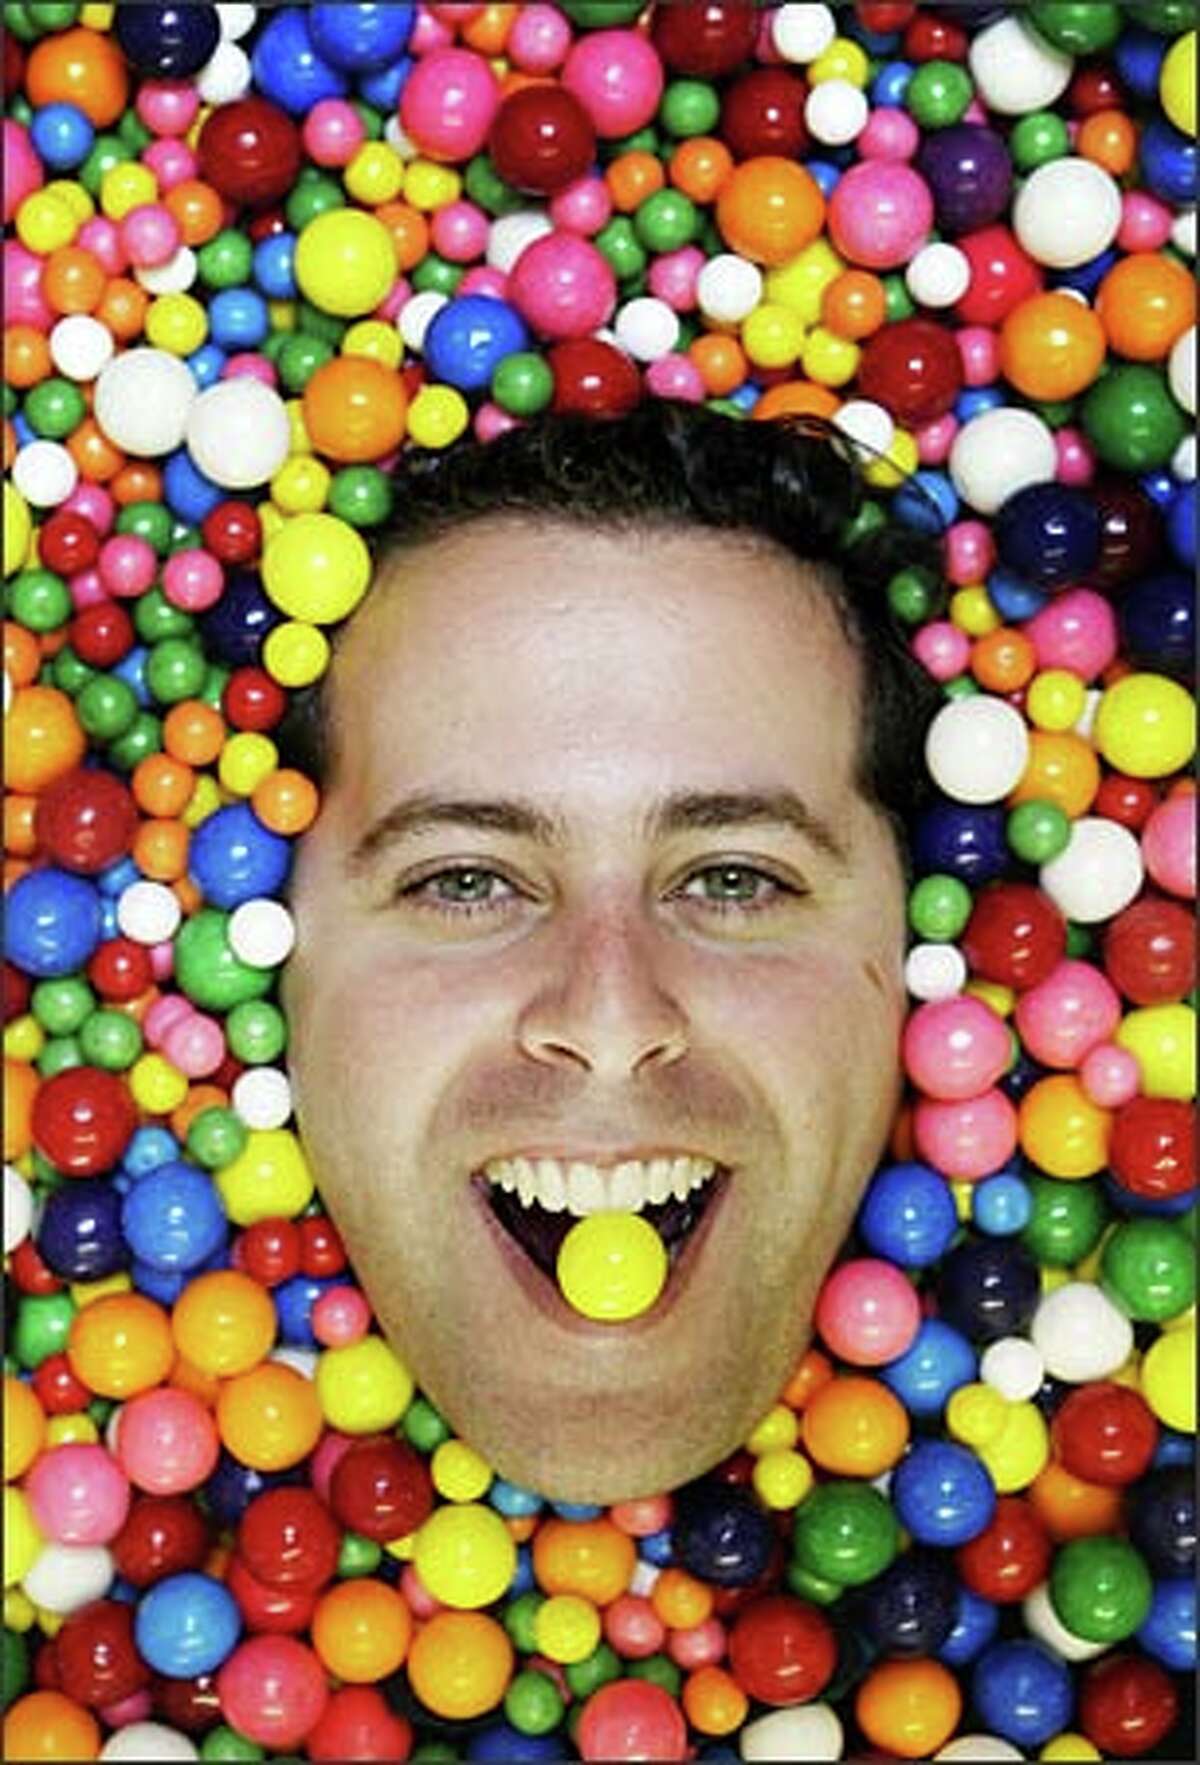 Tal Moore founded Seattle-based Gumballs.com in his bedroom when he was 25 years old. The gumball machine company has grown into an international business with millions of dollars in sales.